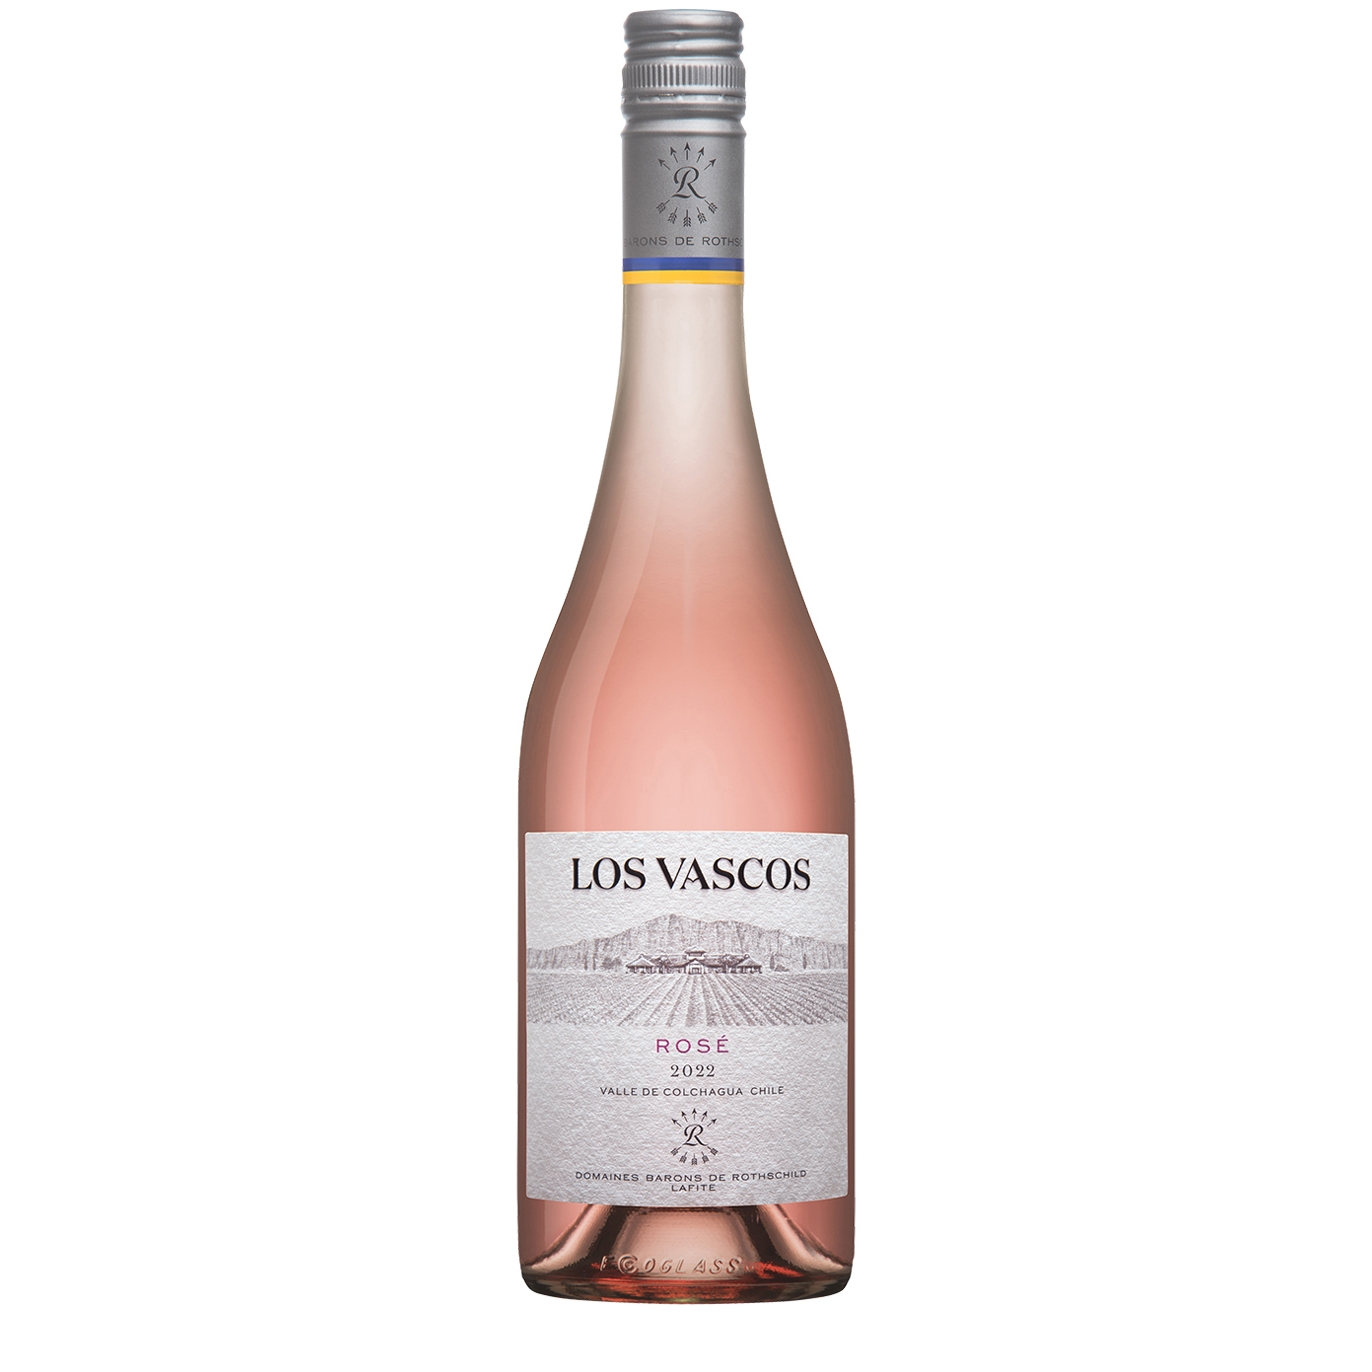 The Rothschild Collection Los Vascos Rosé 2022